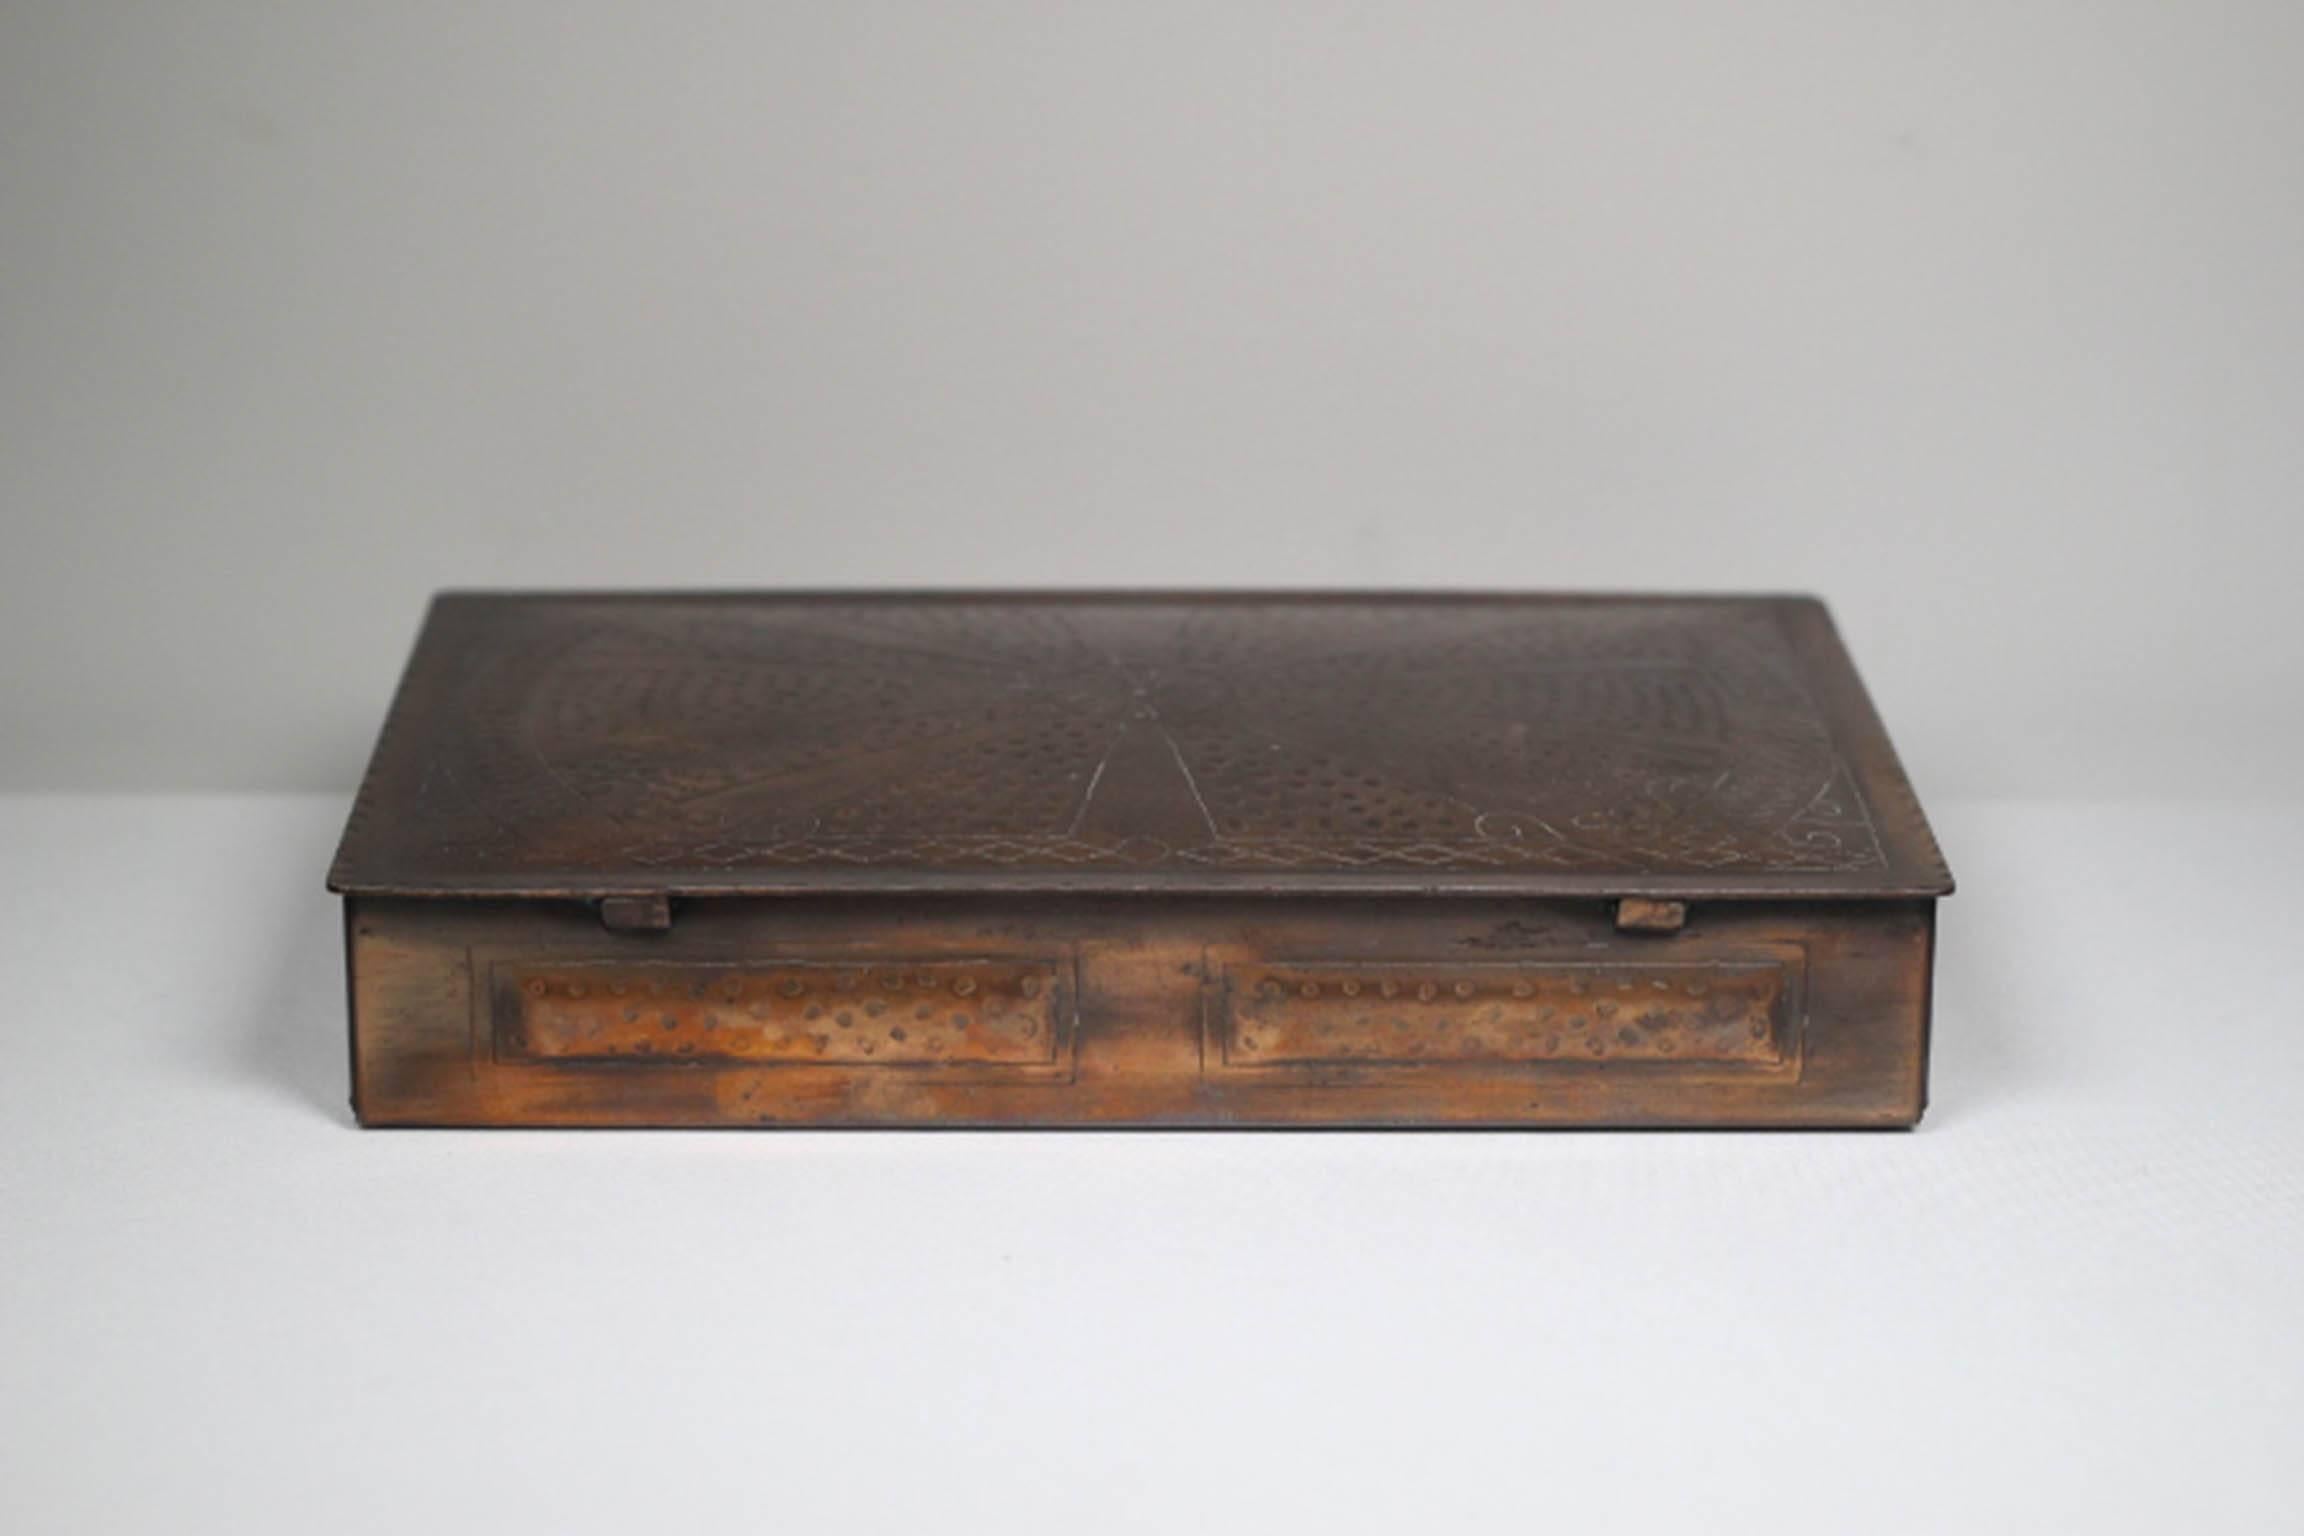 Copper-plated box lined with sandlewood.